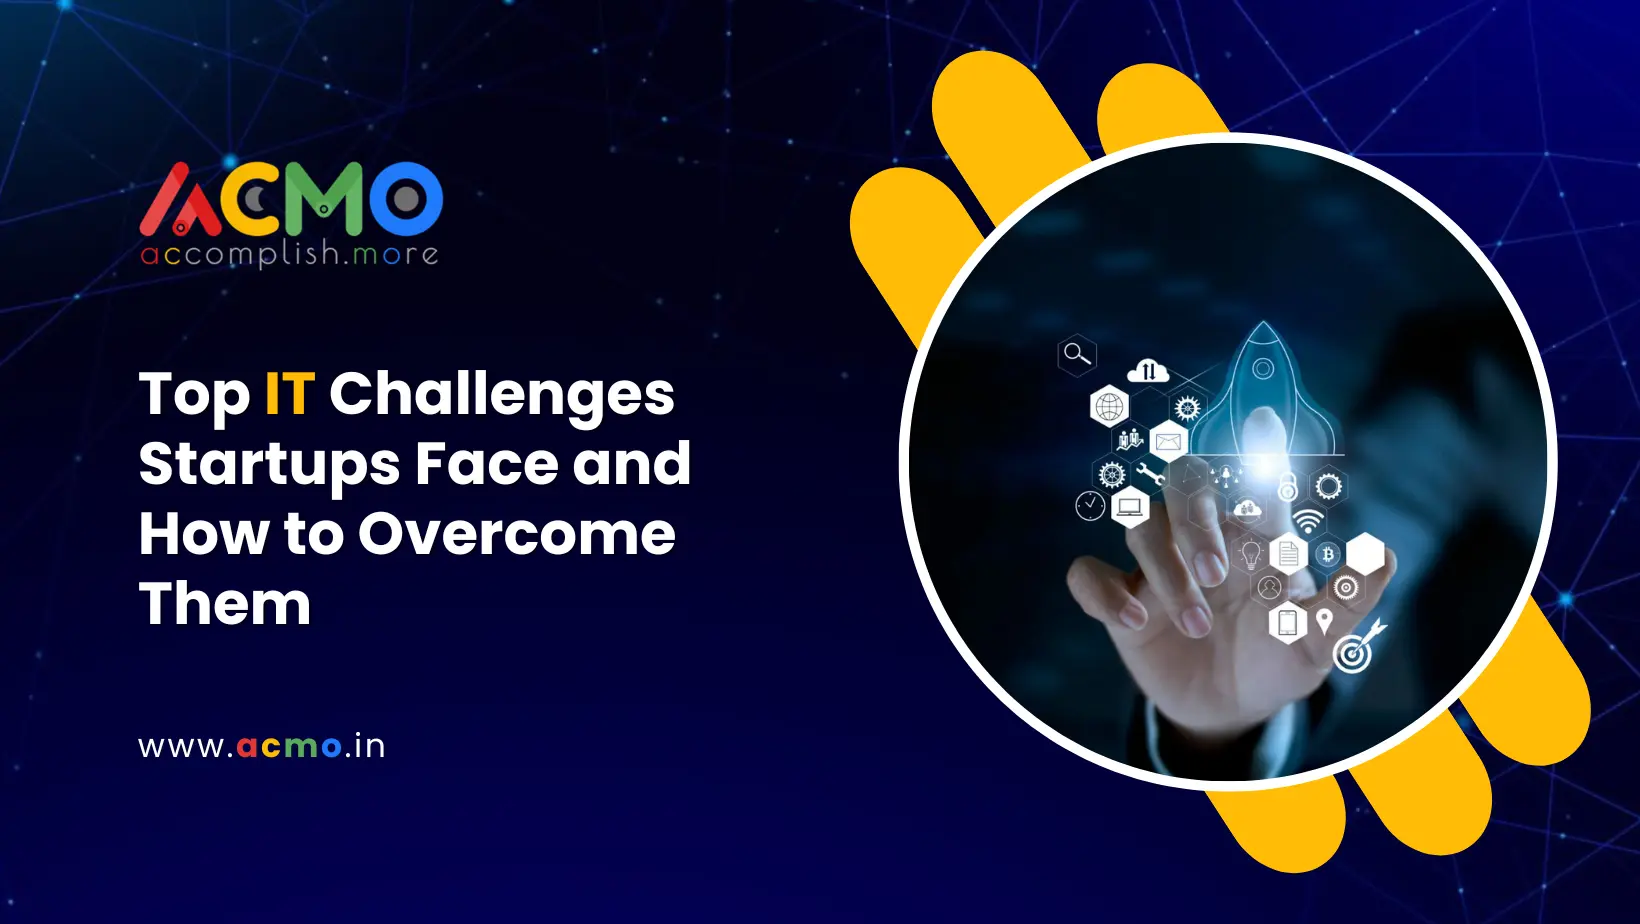 Top IT Challenges Startups Face and How to Overcome Them